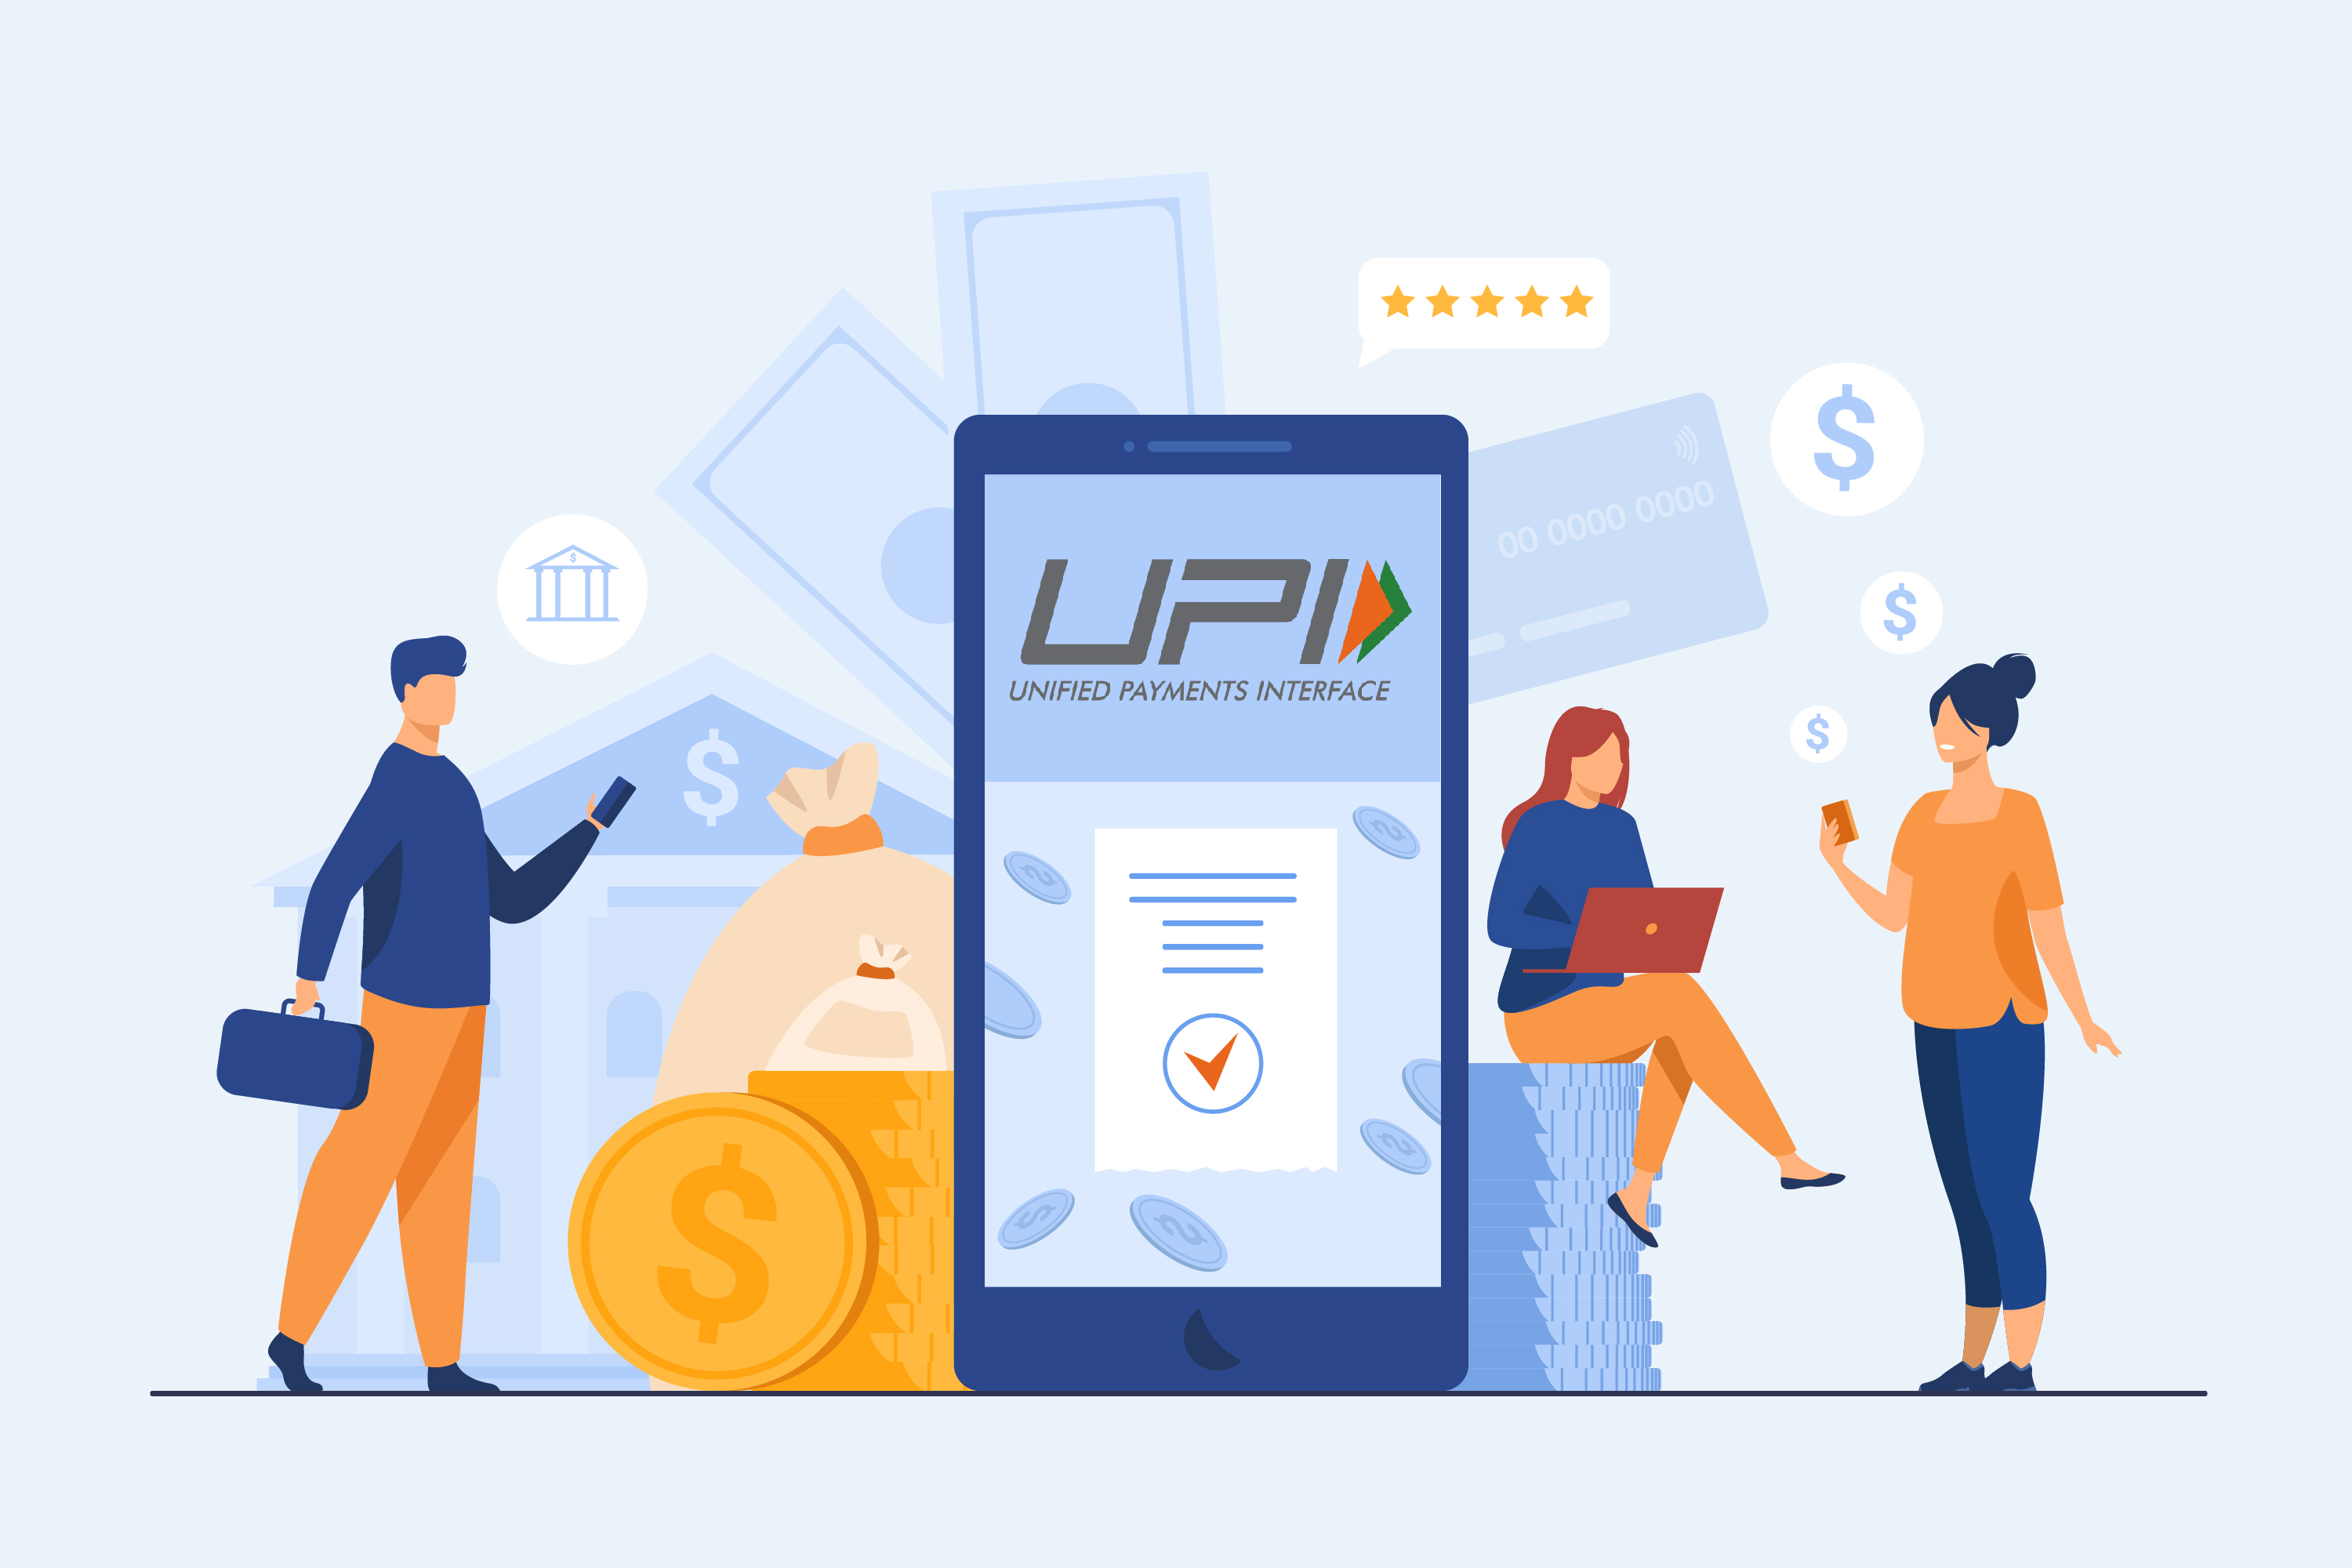 UPI - Unified payments interface